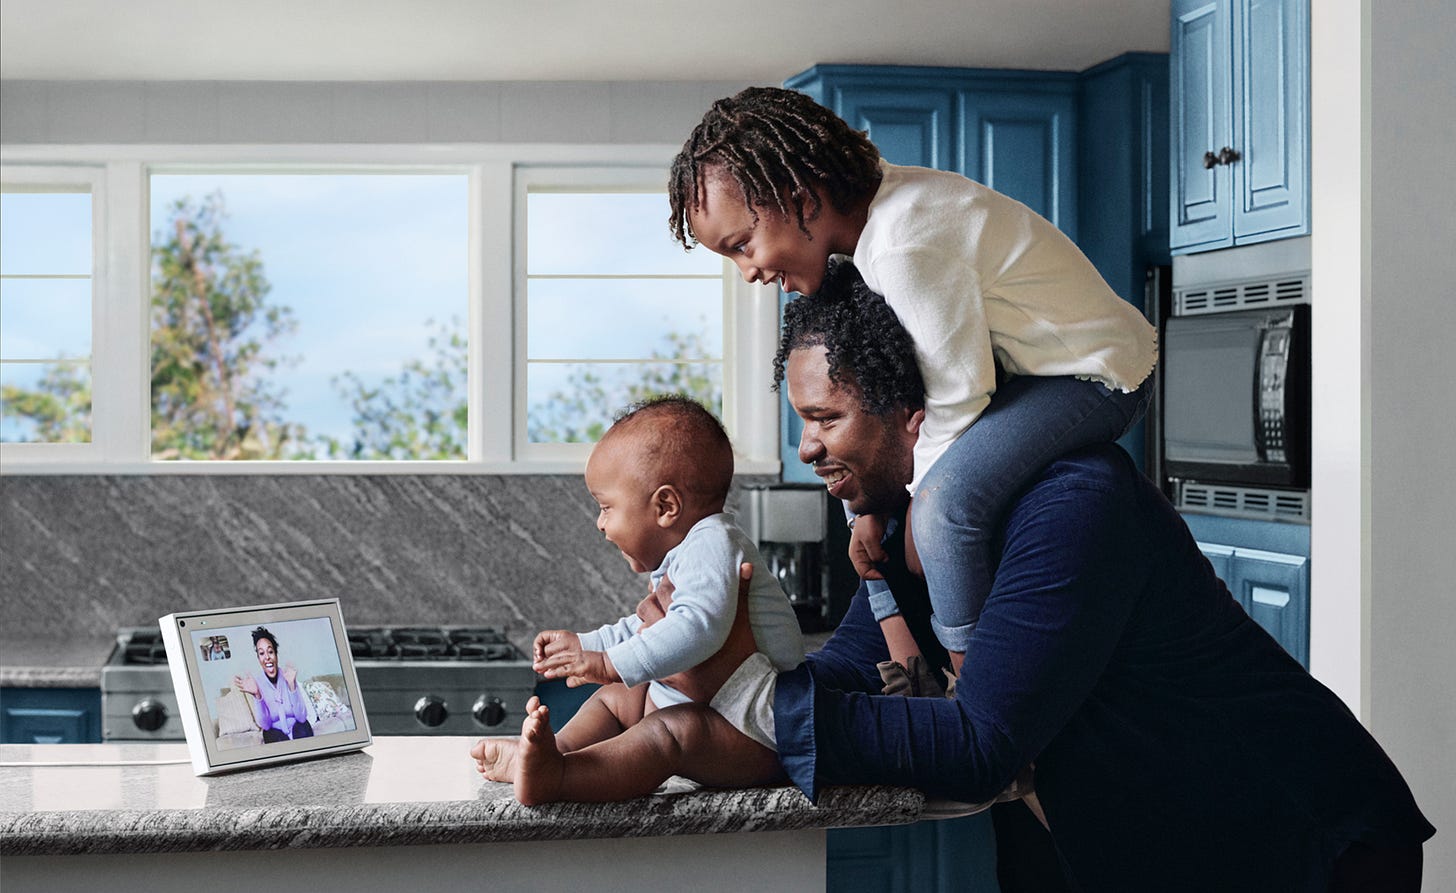 father with two children in kitchen conversing with grandmother via Portal device